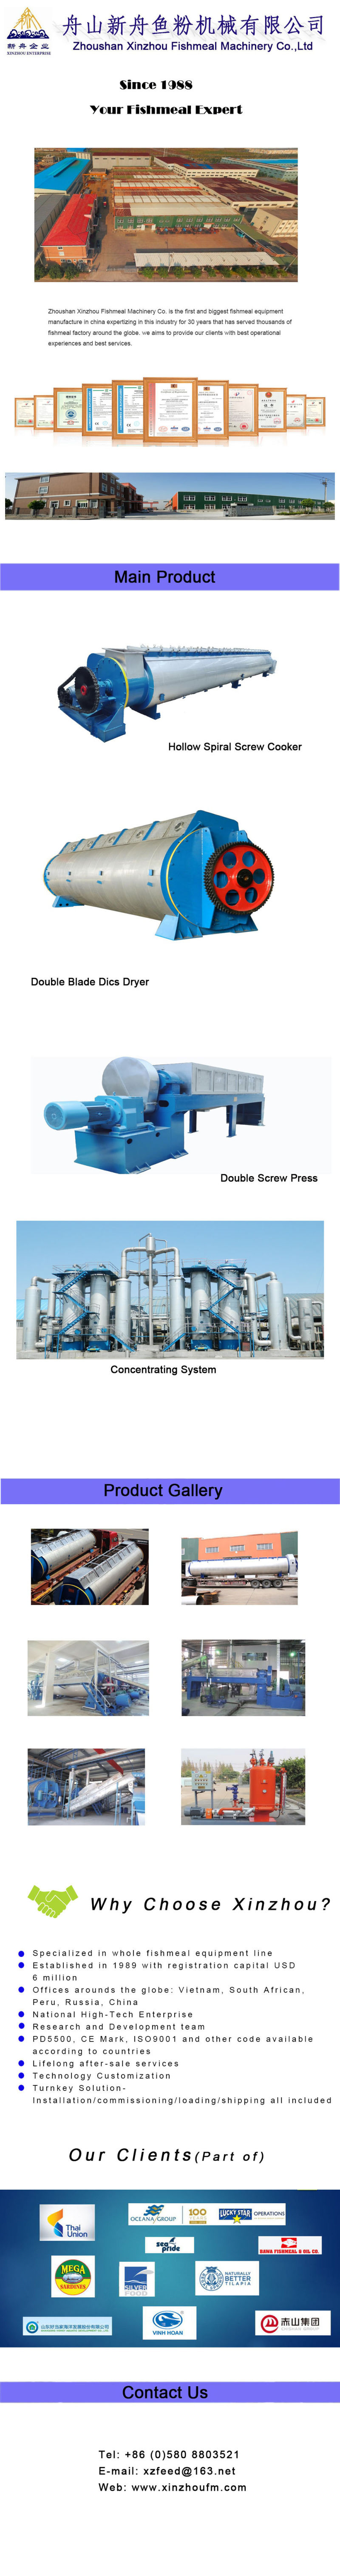 Fishmeal Deodorizer to Process The Odor in Fishmeal Plant